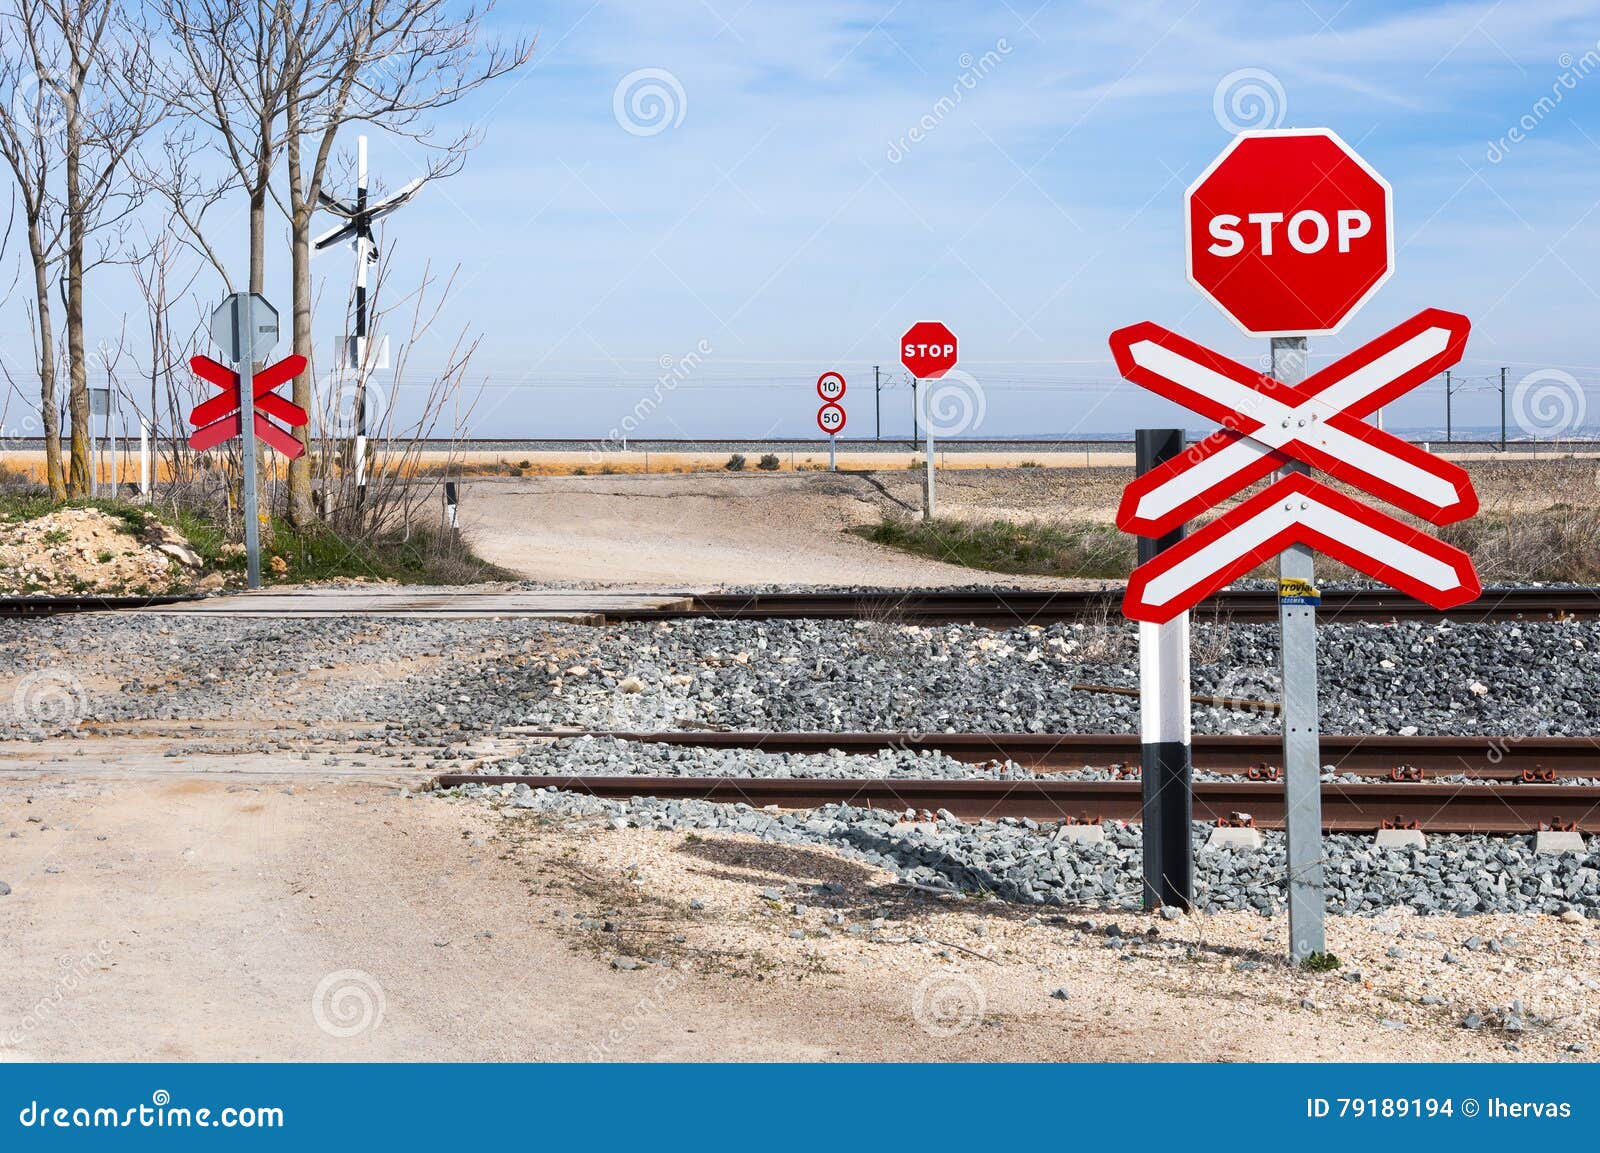 Stop Sign In A Level Crossing Stock Photo Image Of Toledo Crossing